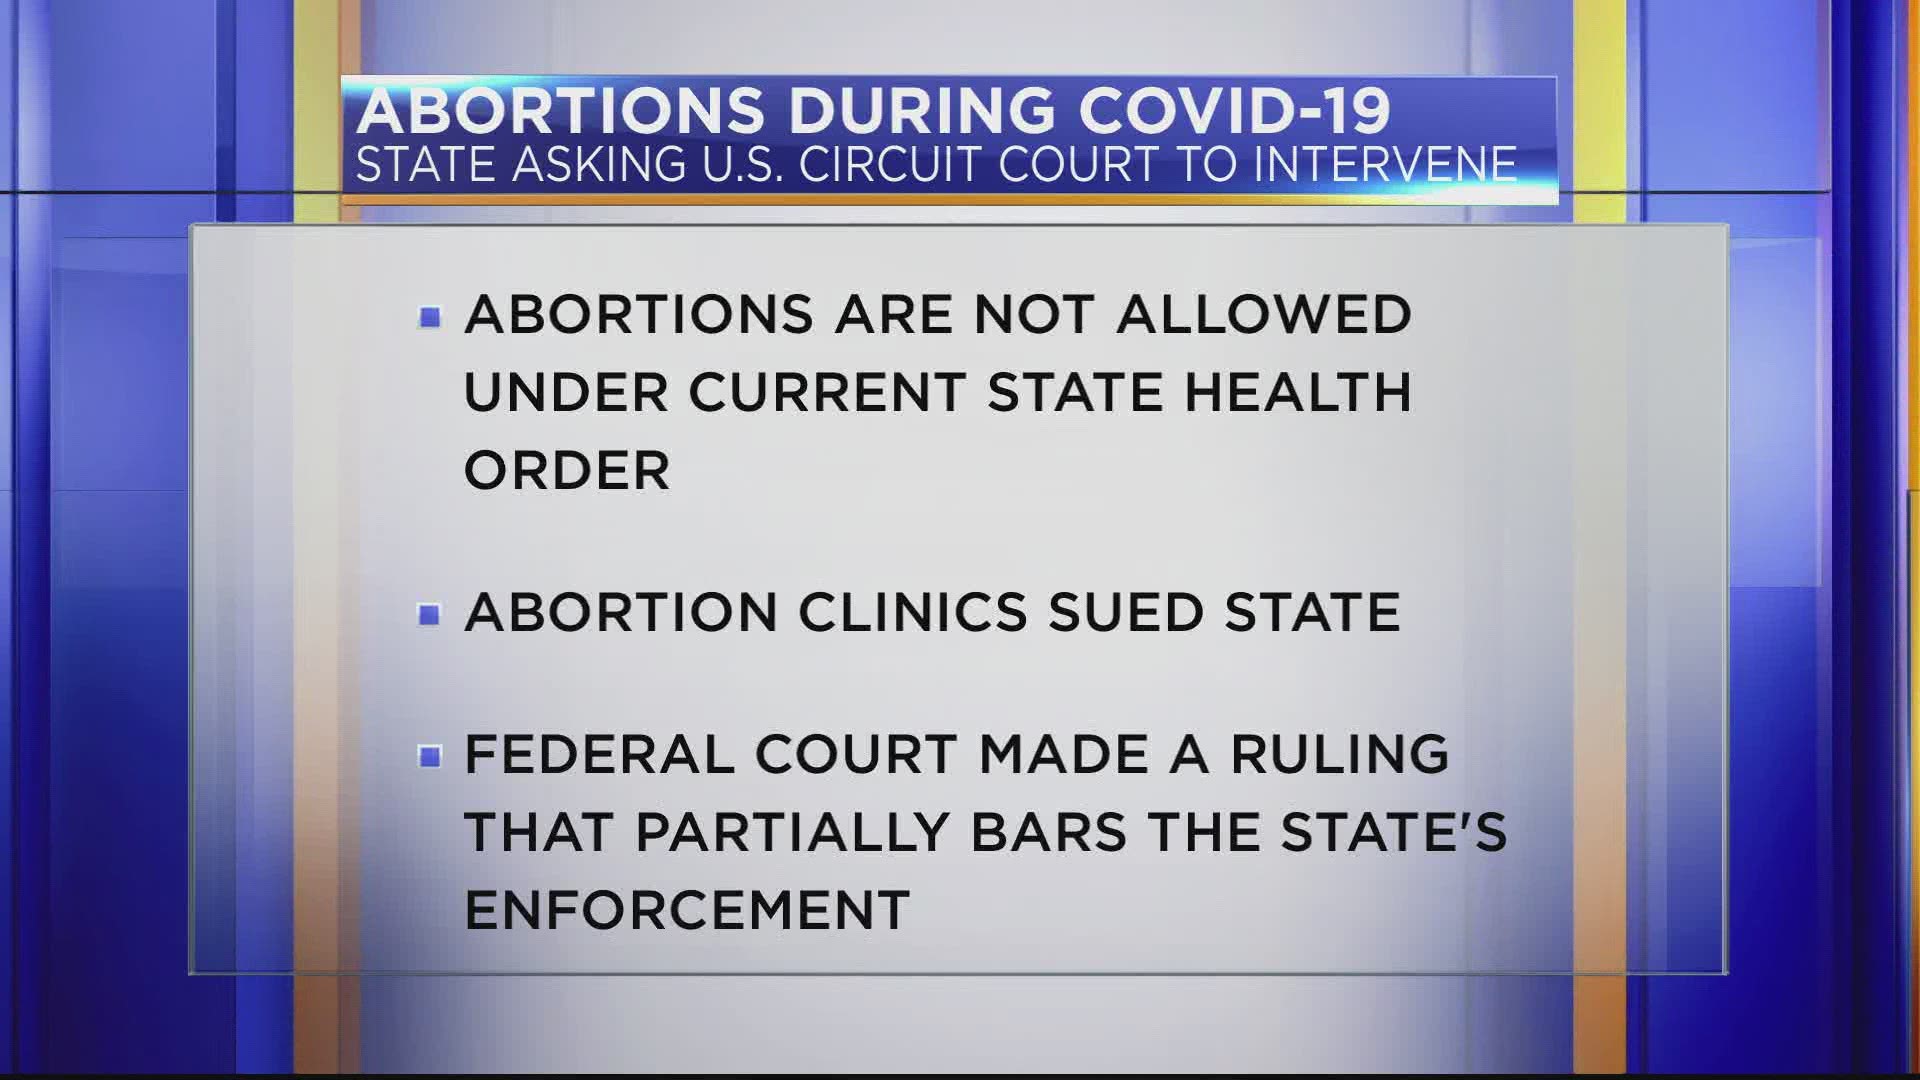 This comes after abortion clinics sued the state for not allowing abortions under the current COVID-19 health order.